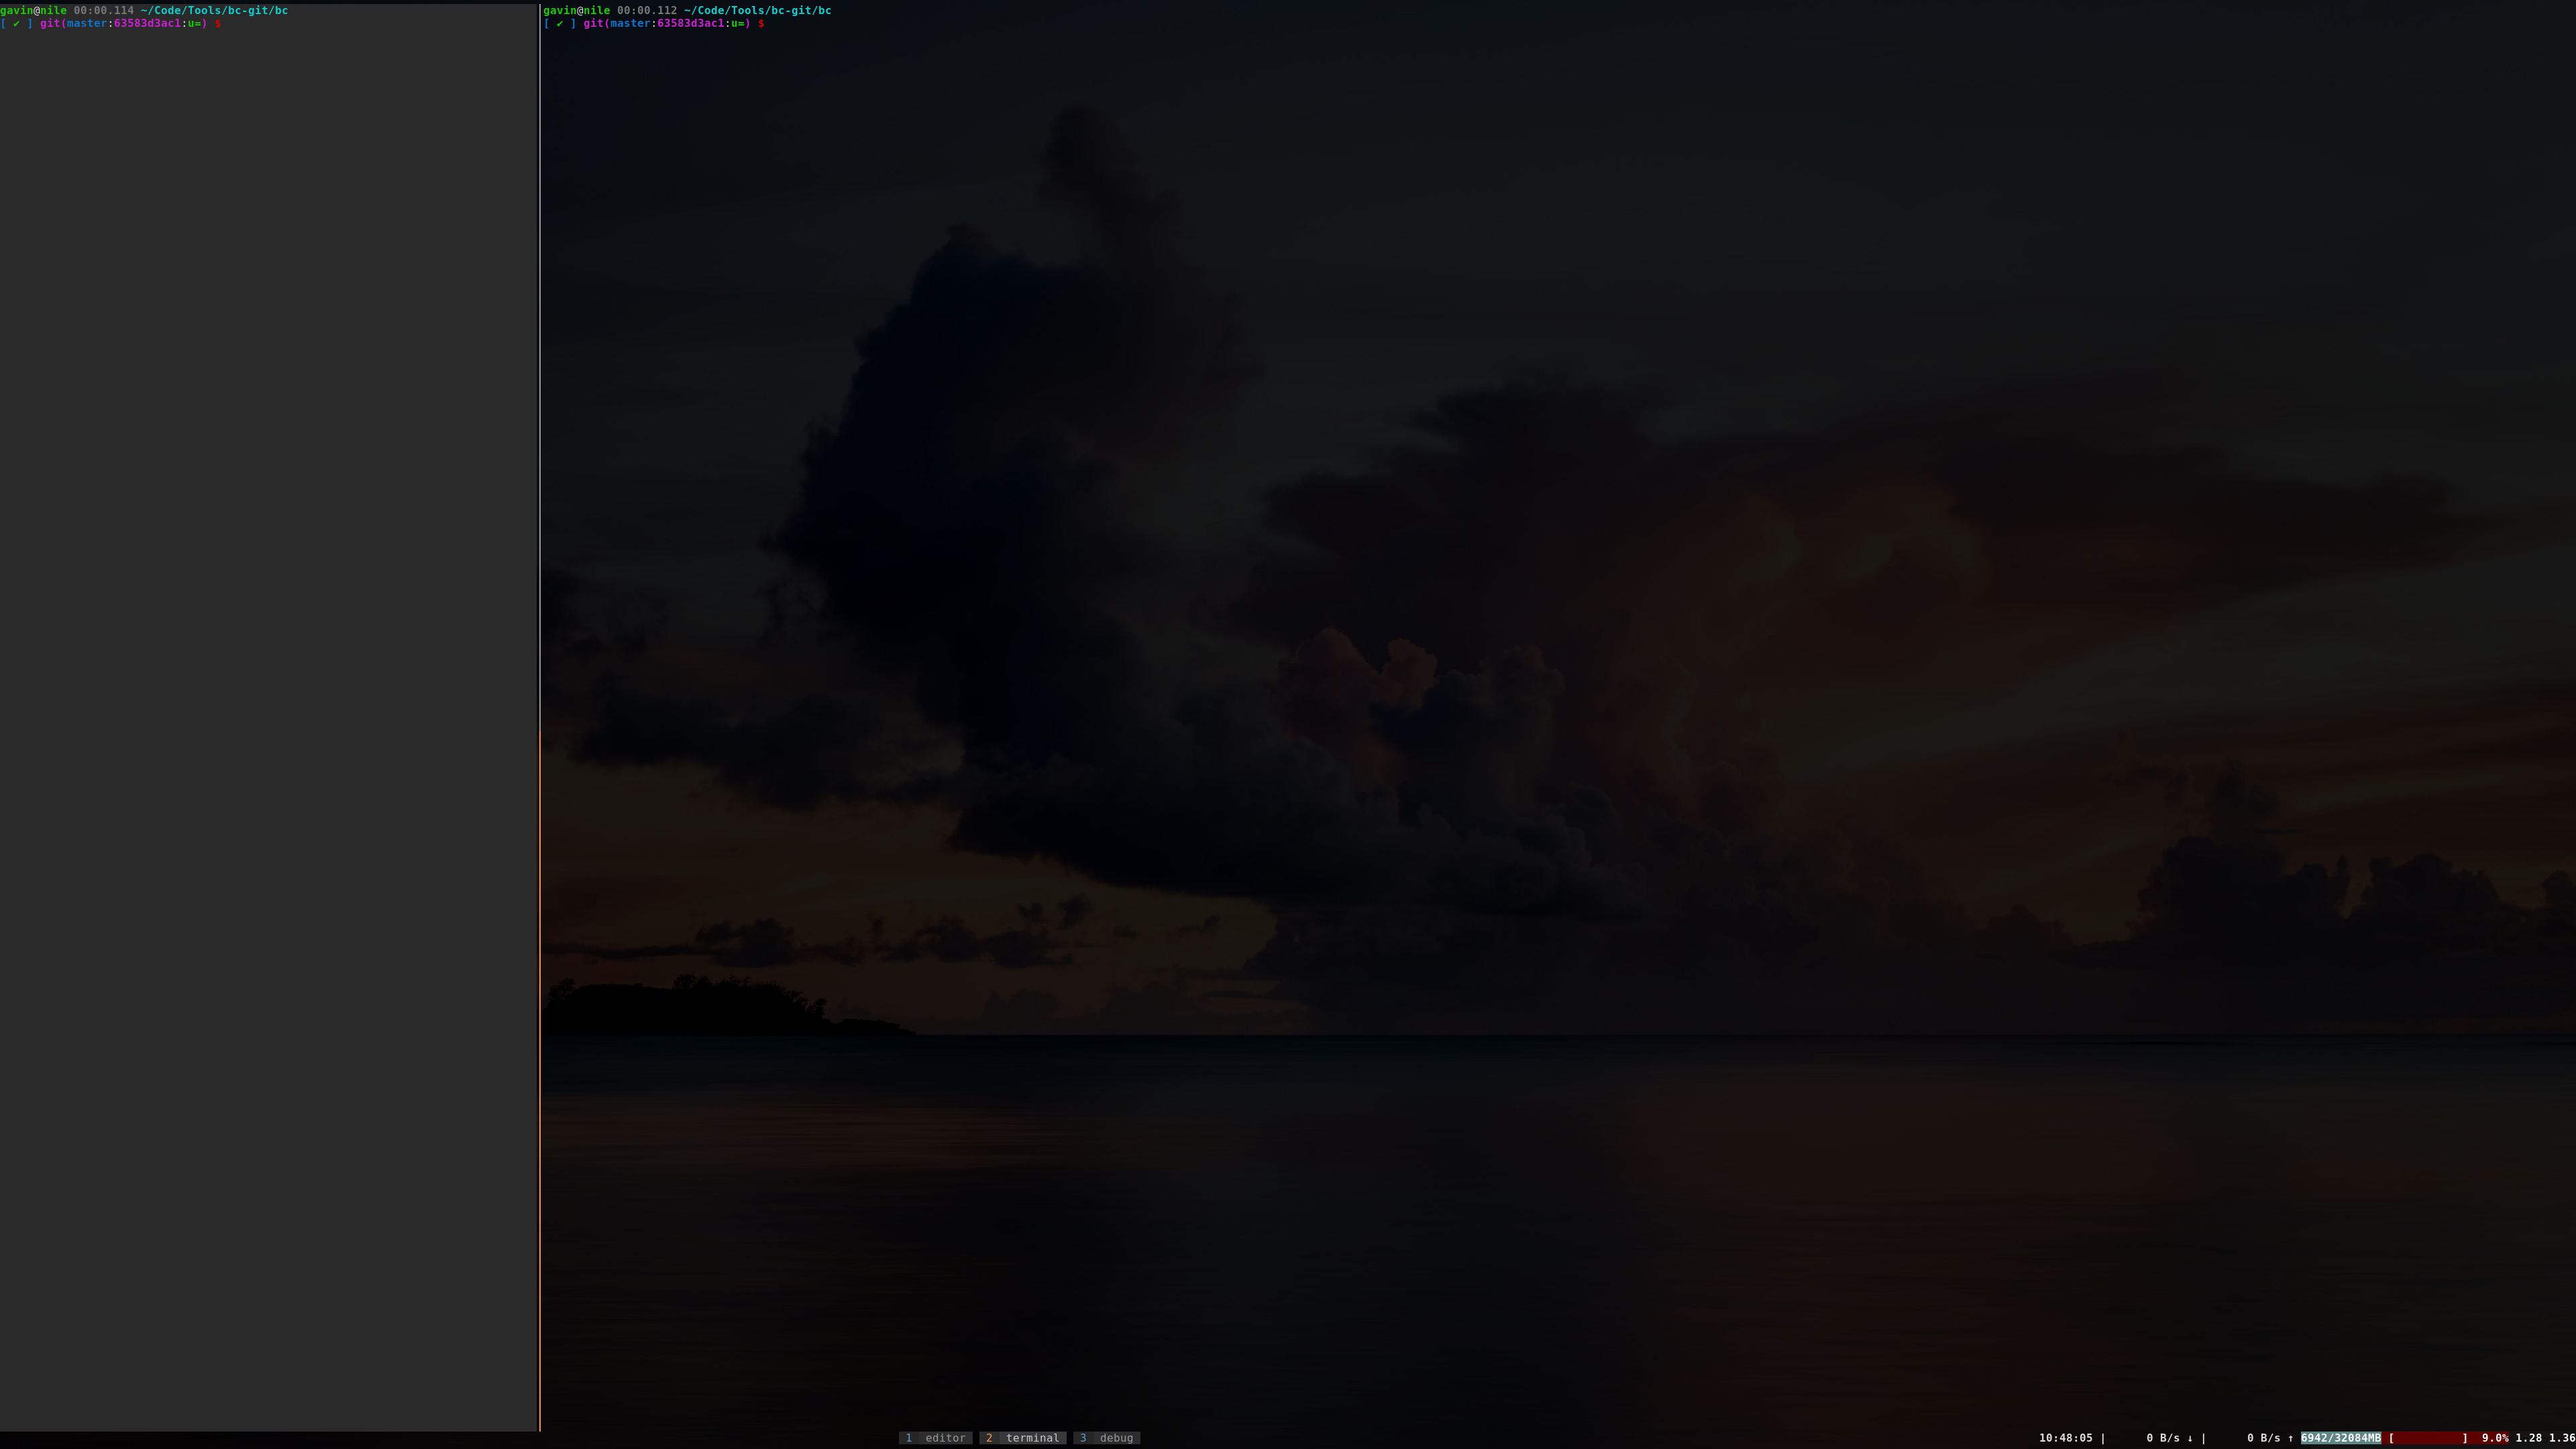 After switching to my tmux terminal window.